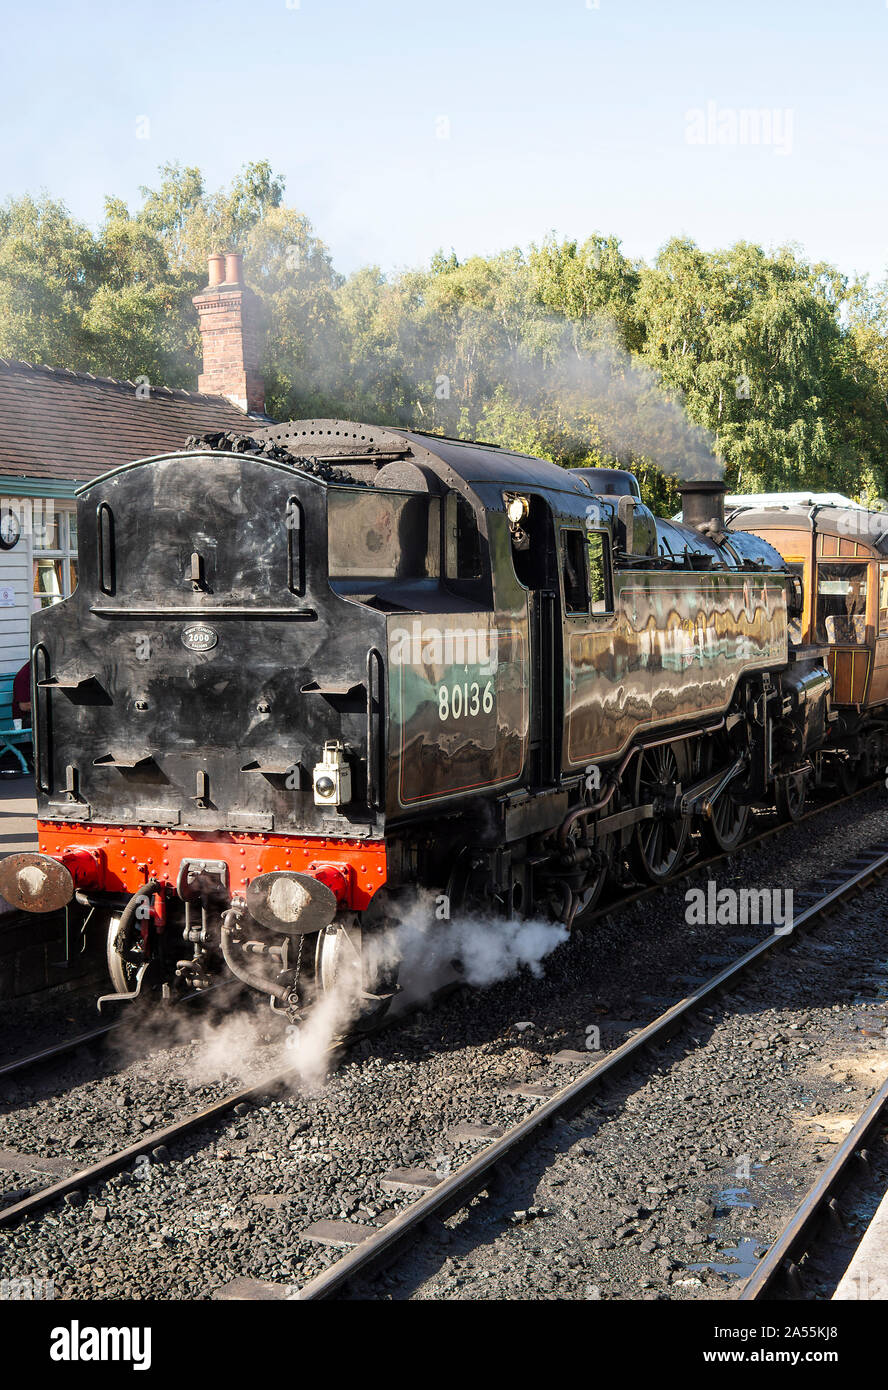 Former British Railways Standard 4 Tank Steam Engine 80136 Pulling an Observation Carriage at Grosmont Station on NYMR North Yorkshire England UK Stock Photo